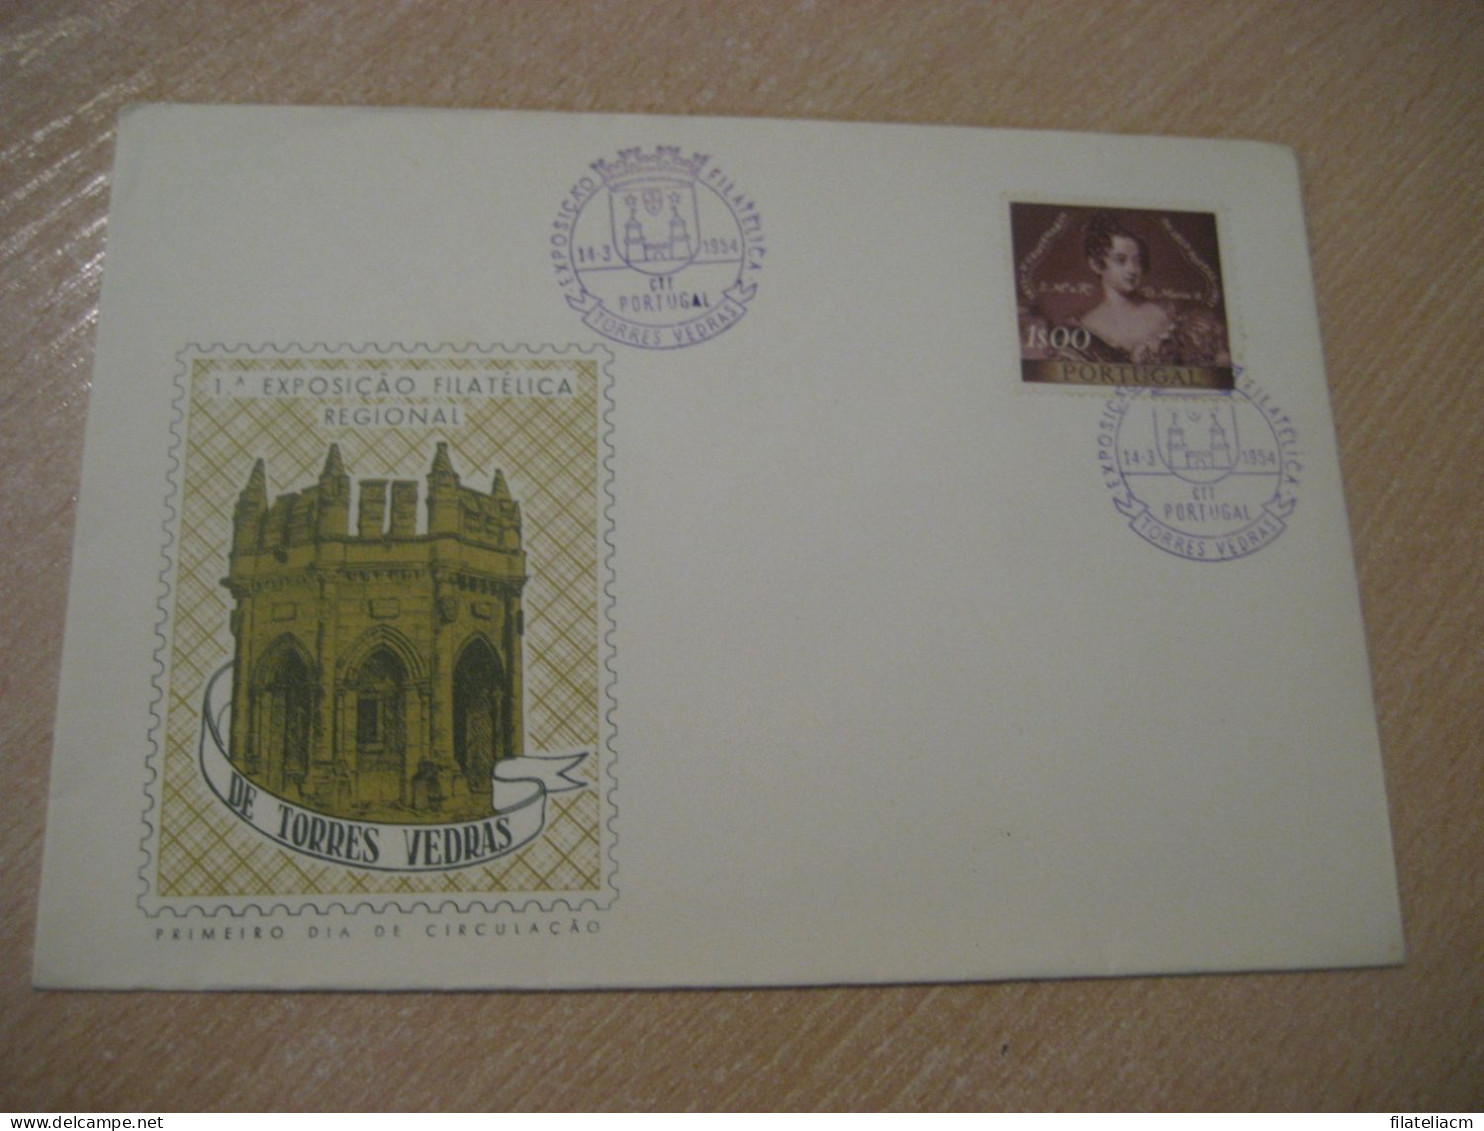 TORRES VEDRAS 1954 Expo Filatelica Cancel Cover PORTUGAL - Covers & Documents